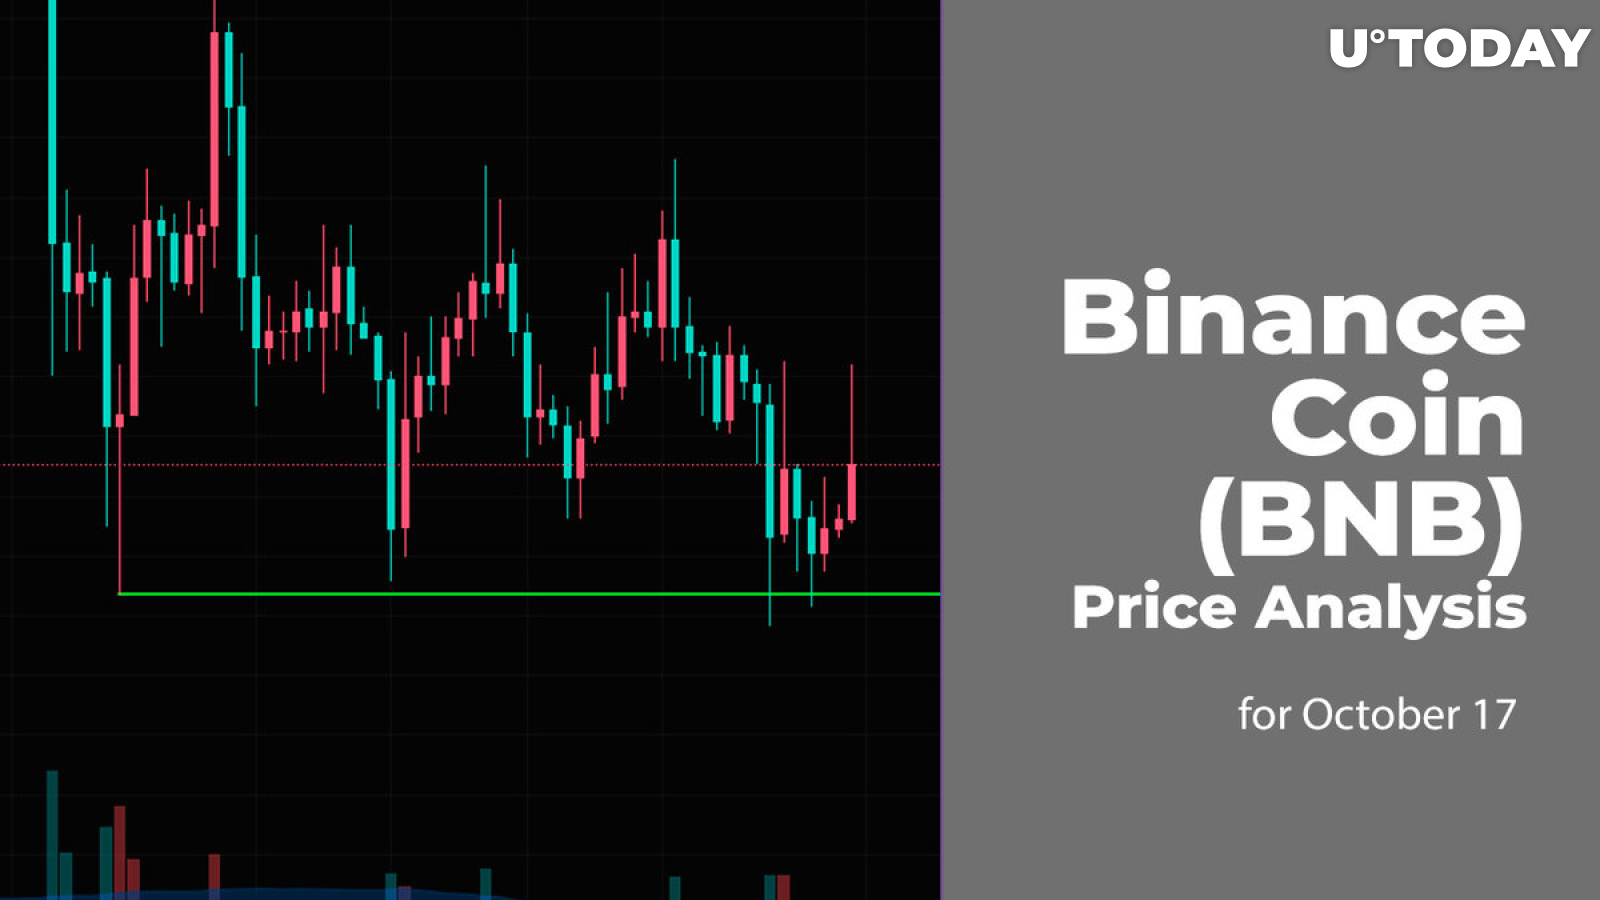 Binance Coin (BNB) Price Analysis for October 17